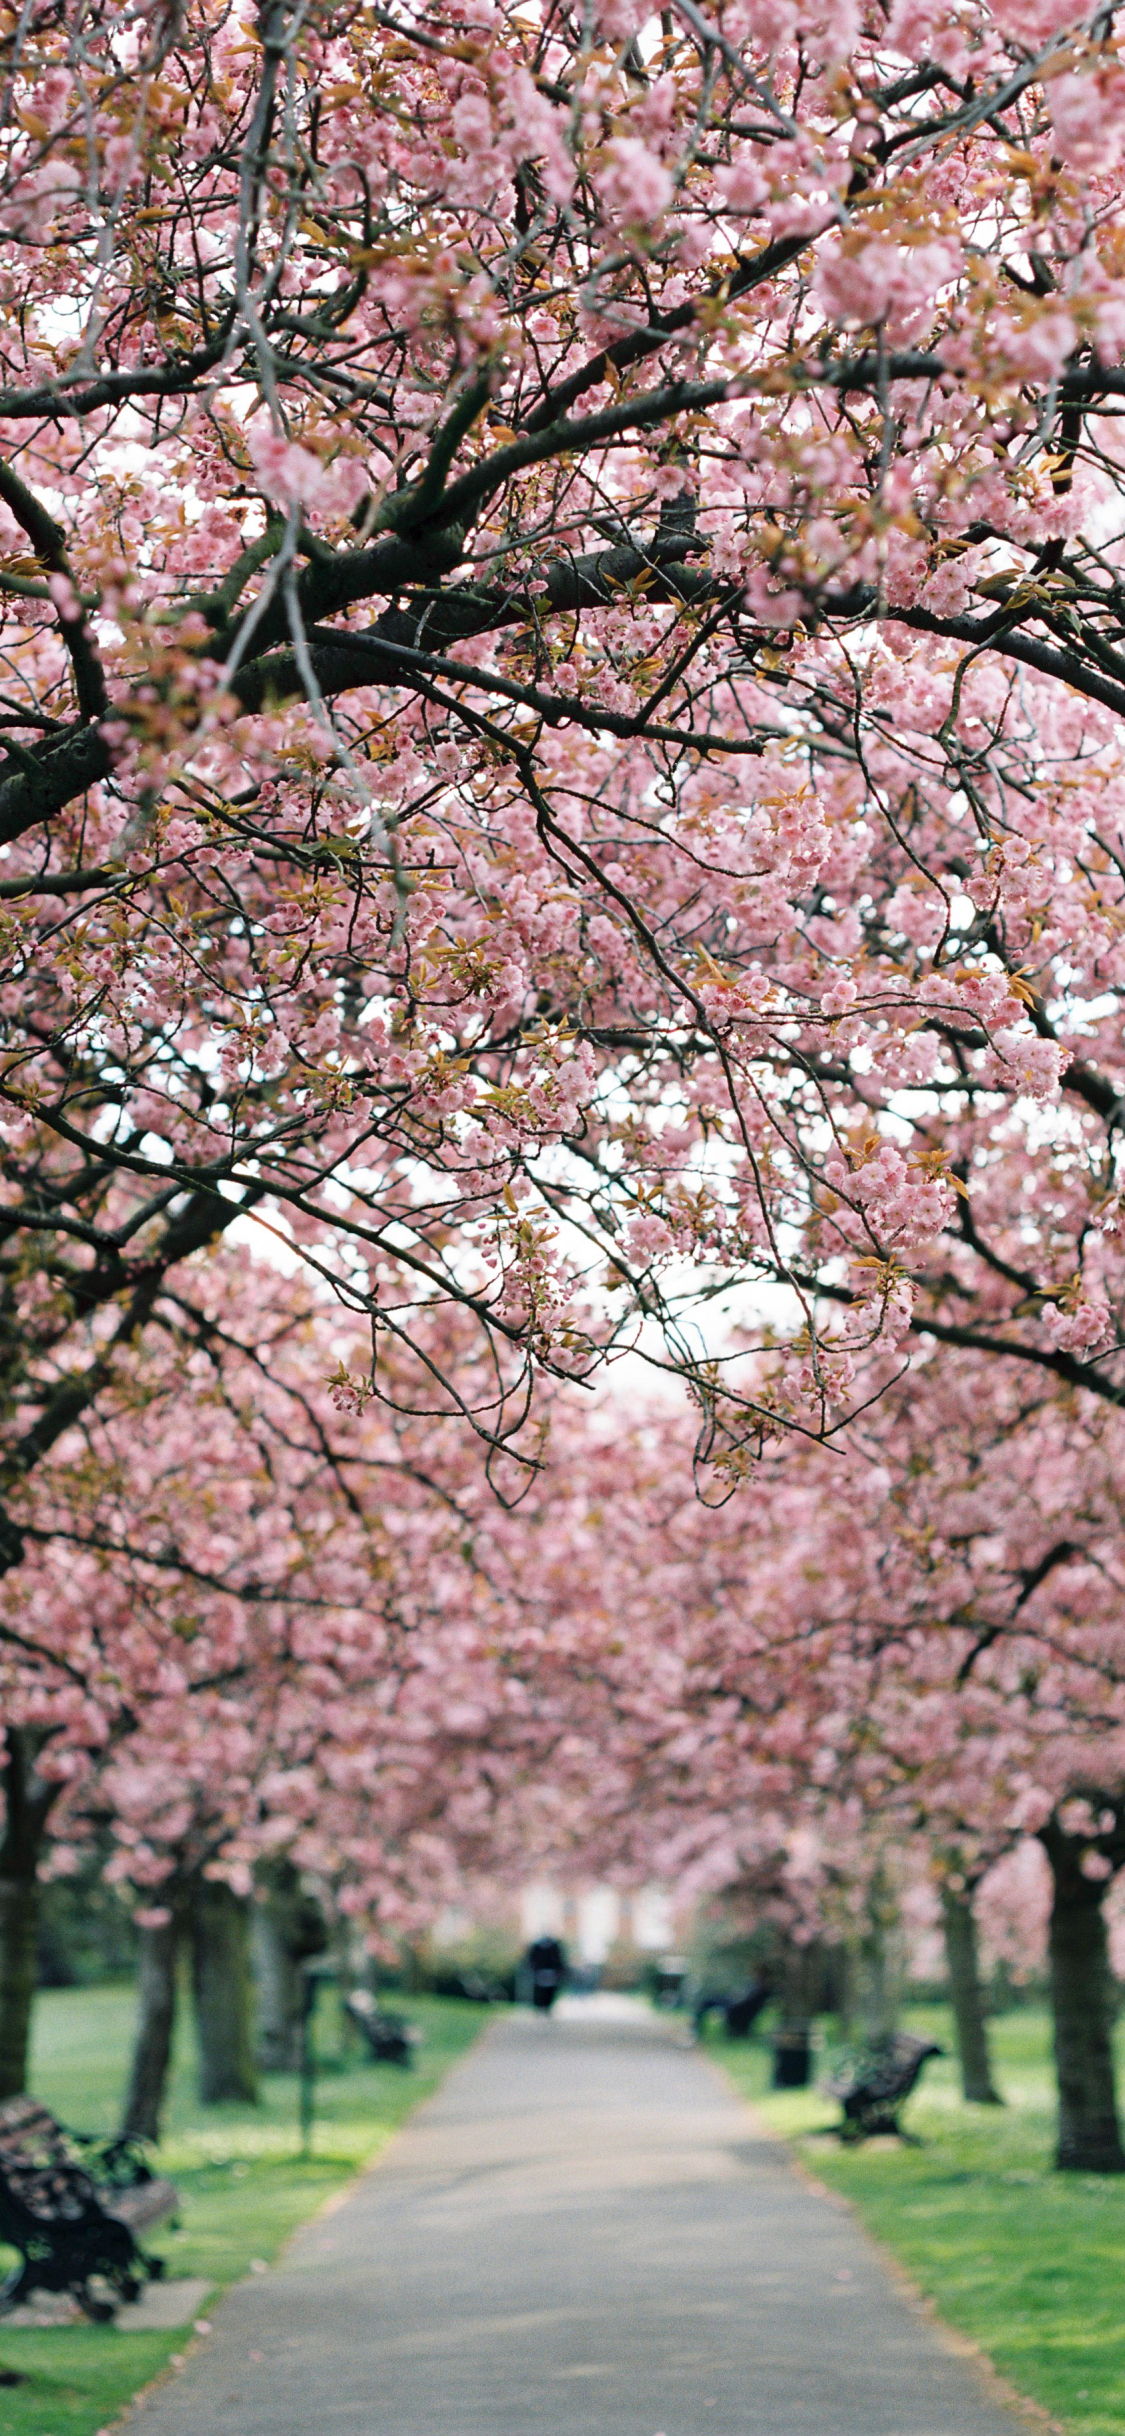 Cherry Blossoms in Spring by Kirstin Mckee